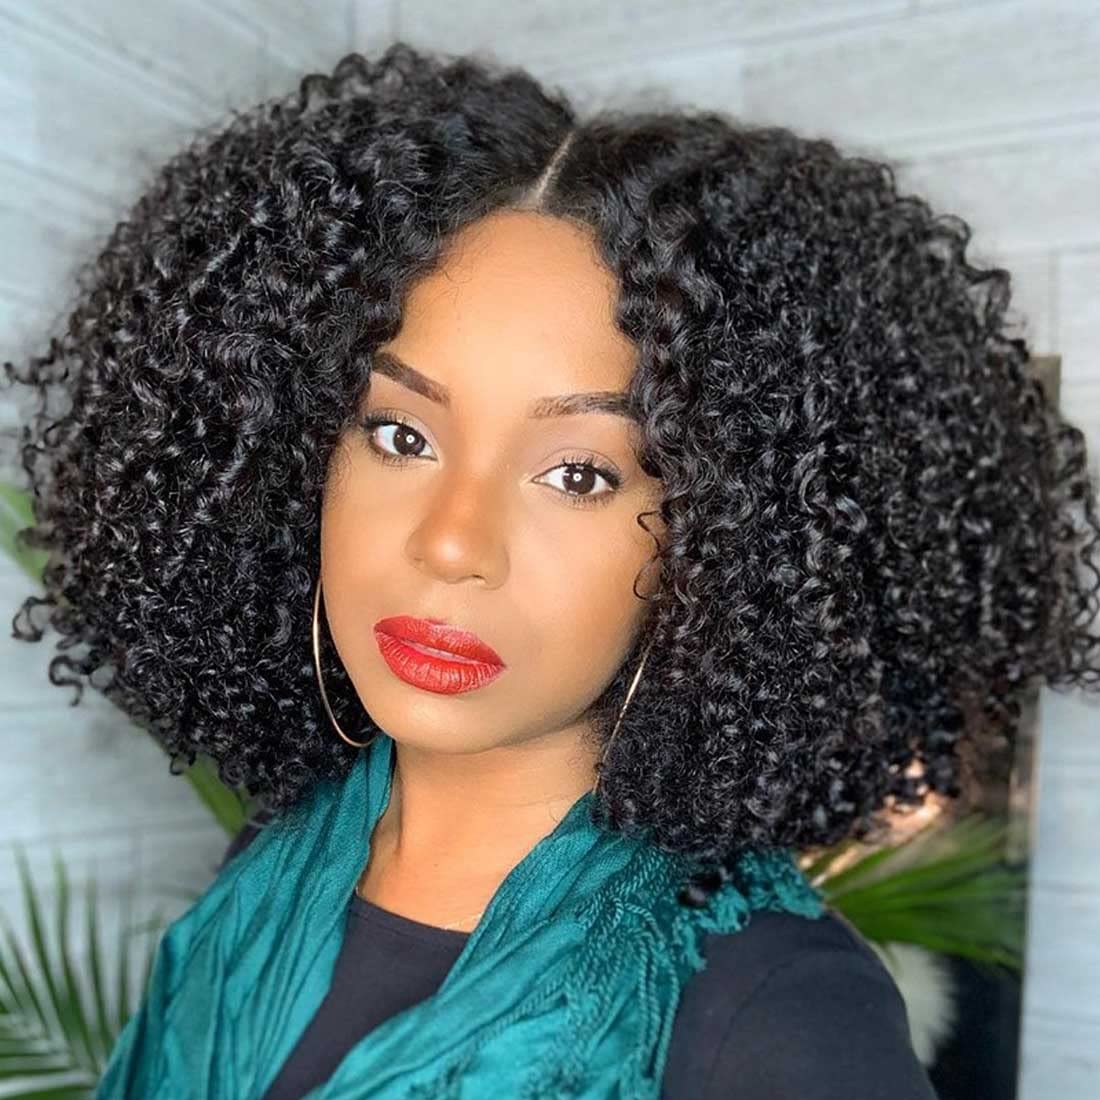 Exclusive $10 Off Code: SM10 Summer Must-Have V Part Bob Curly Wig